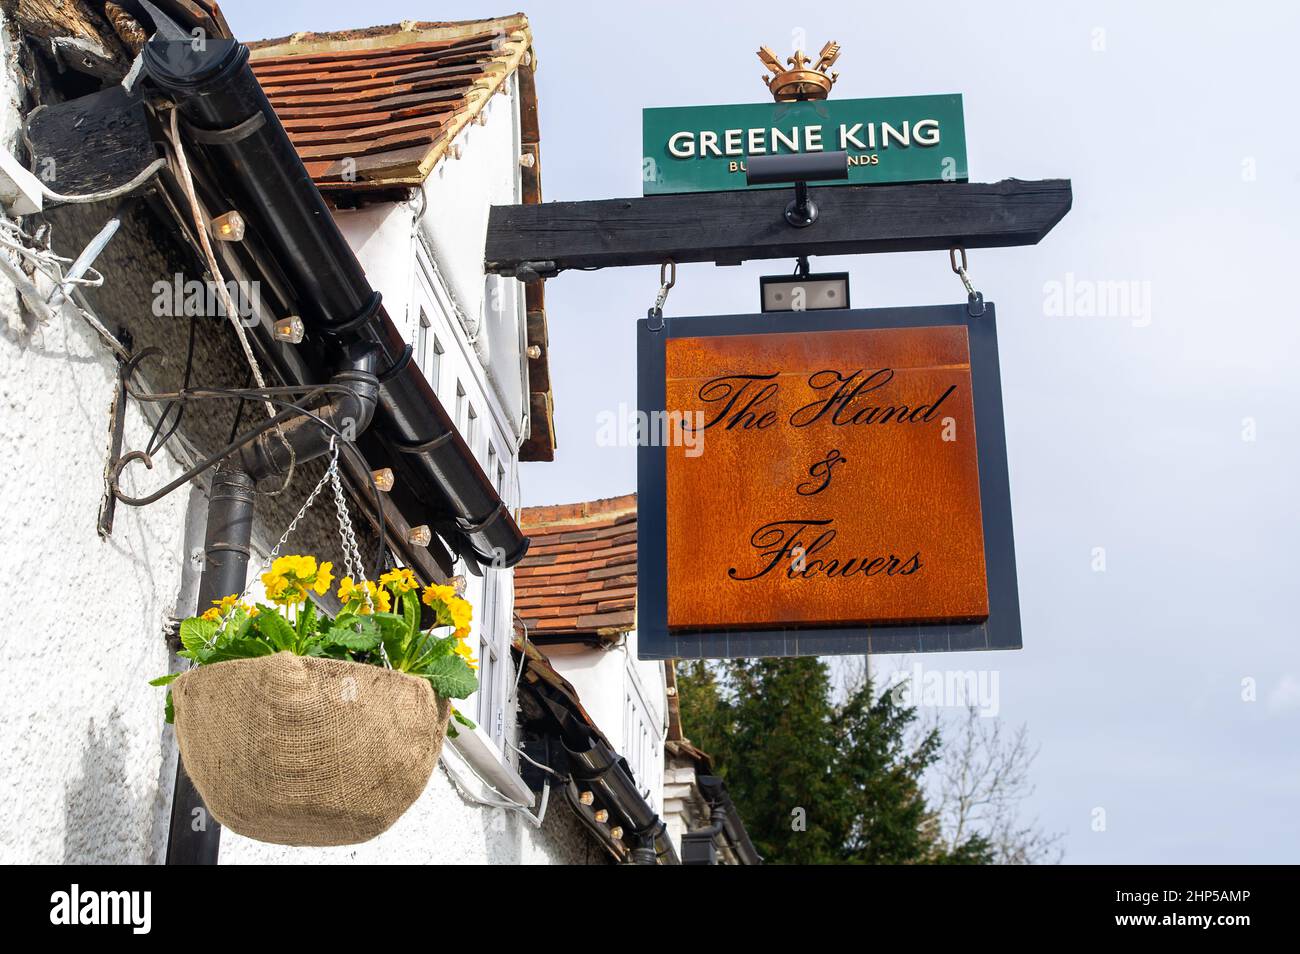 Marlow, Buckinghamshire, UK. 17th February, 2022. The Hand & Flowers pub and restaurant run by celebrity chef Tom Kerridge has retained it's two Michelin stars for another year. Credit: Maureen McLean/Alamy Stock Photo